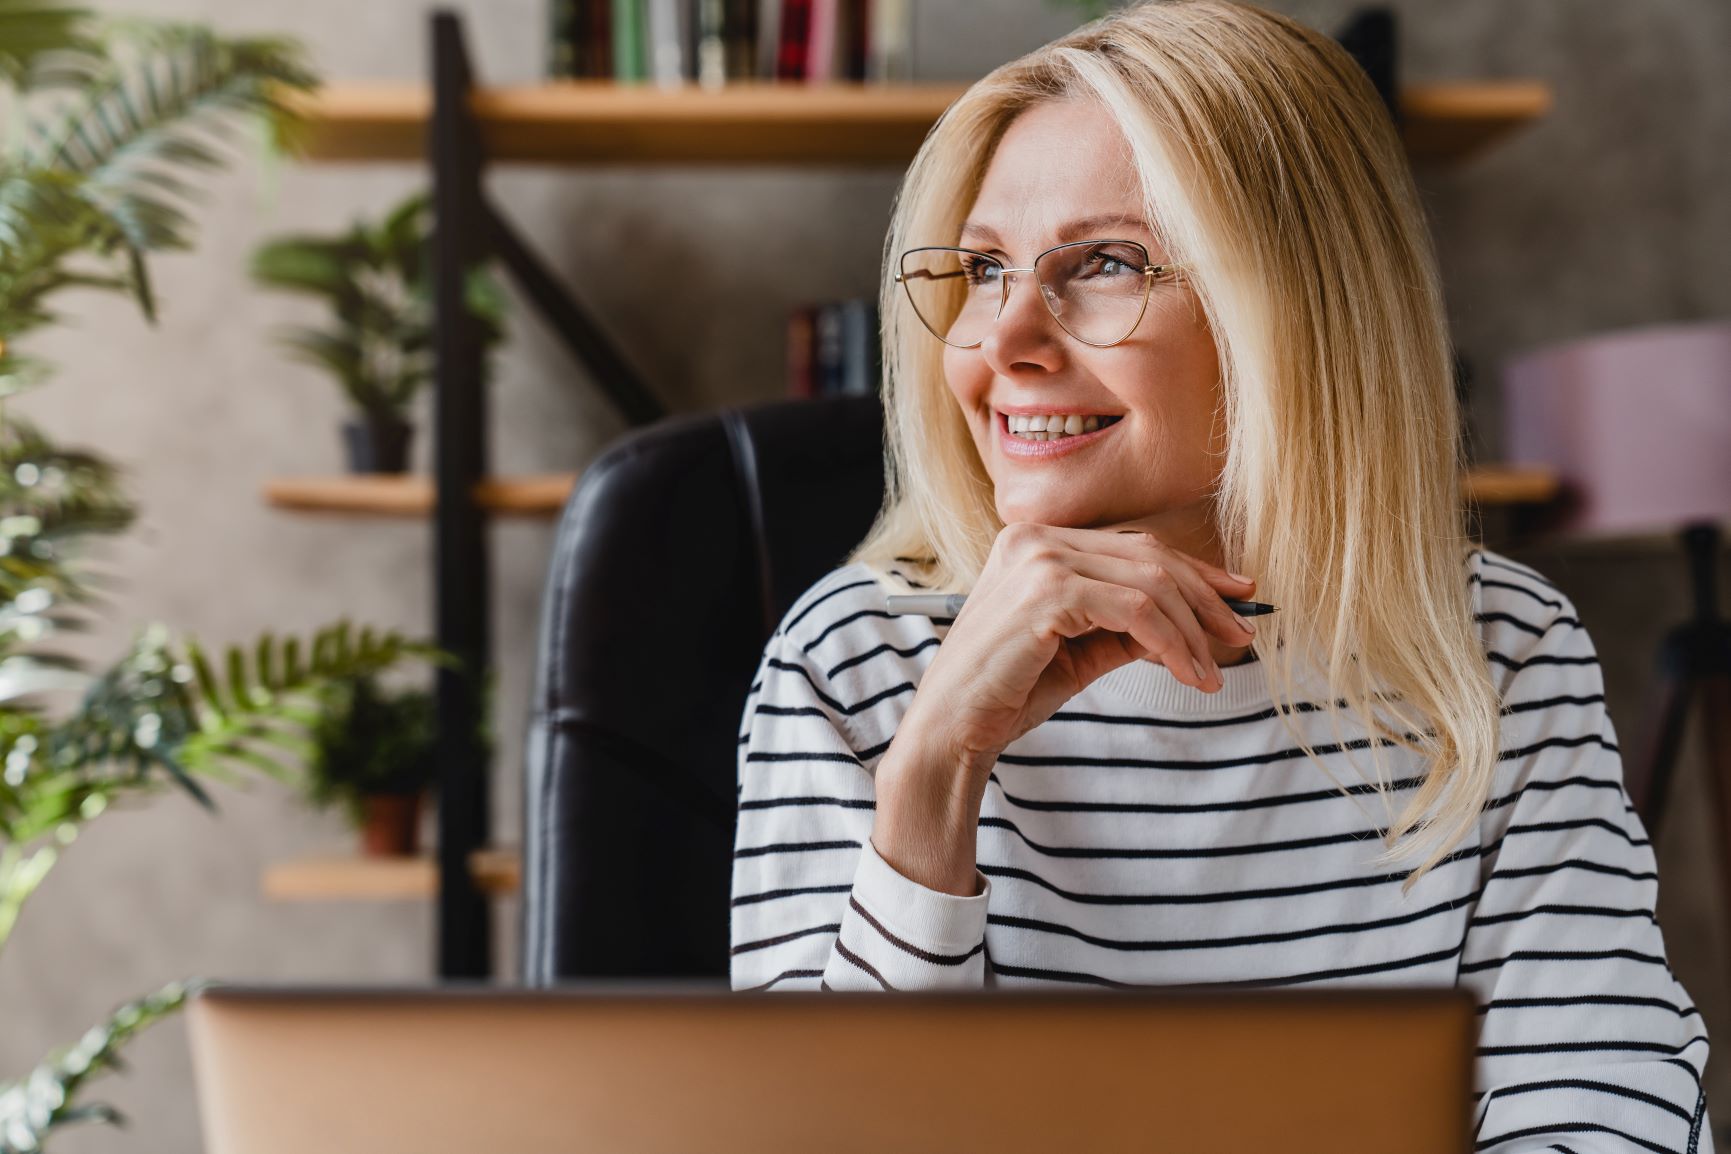 Blonde woman with shoulder-length hair and glasses in white & black striped shirt at comptuer dreaming manifestation for beginners, manifesting your dream life